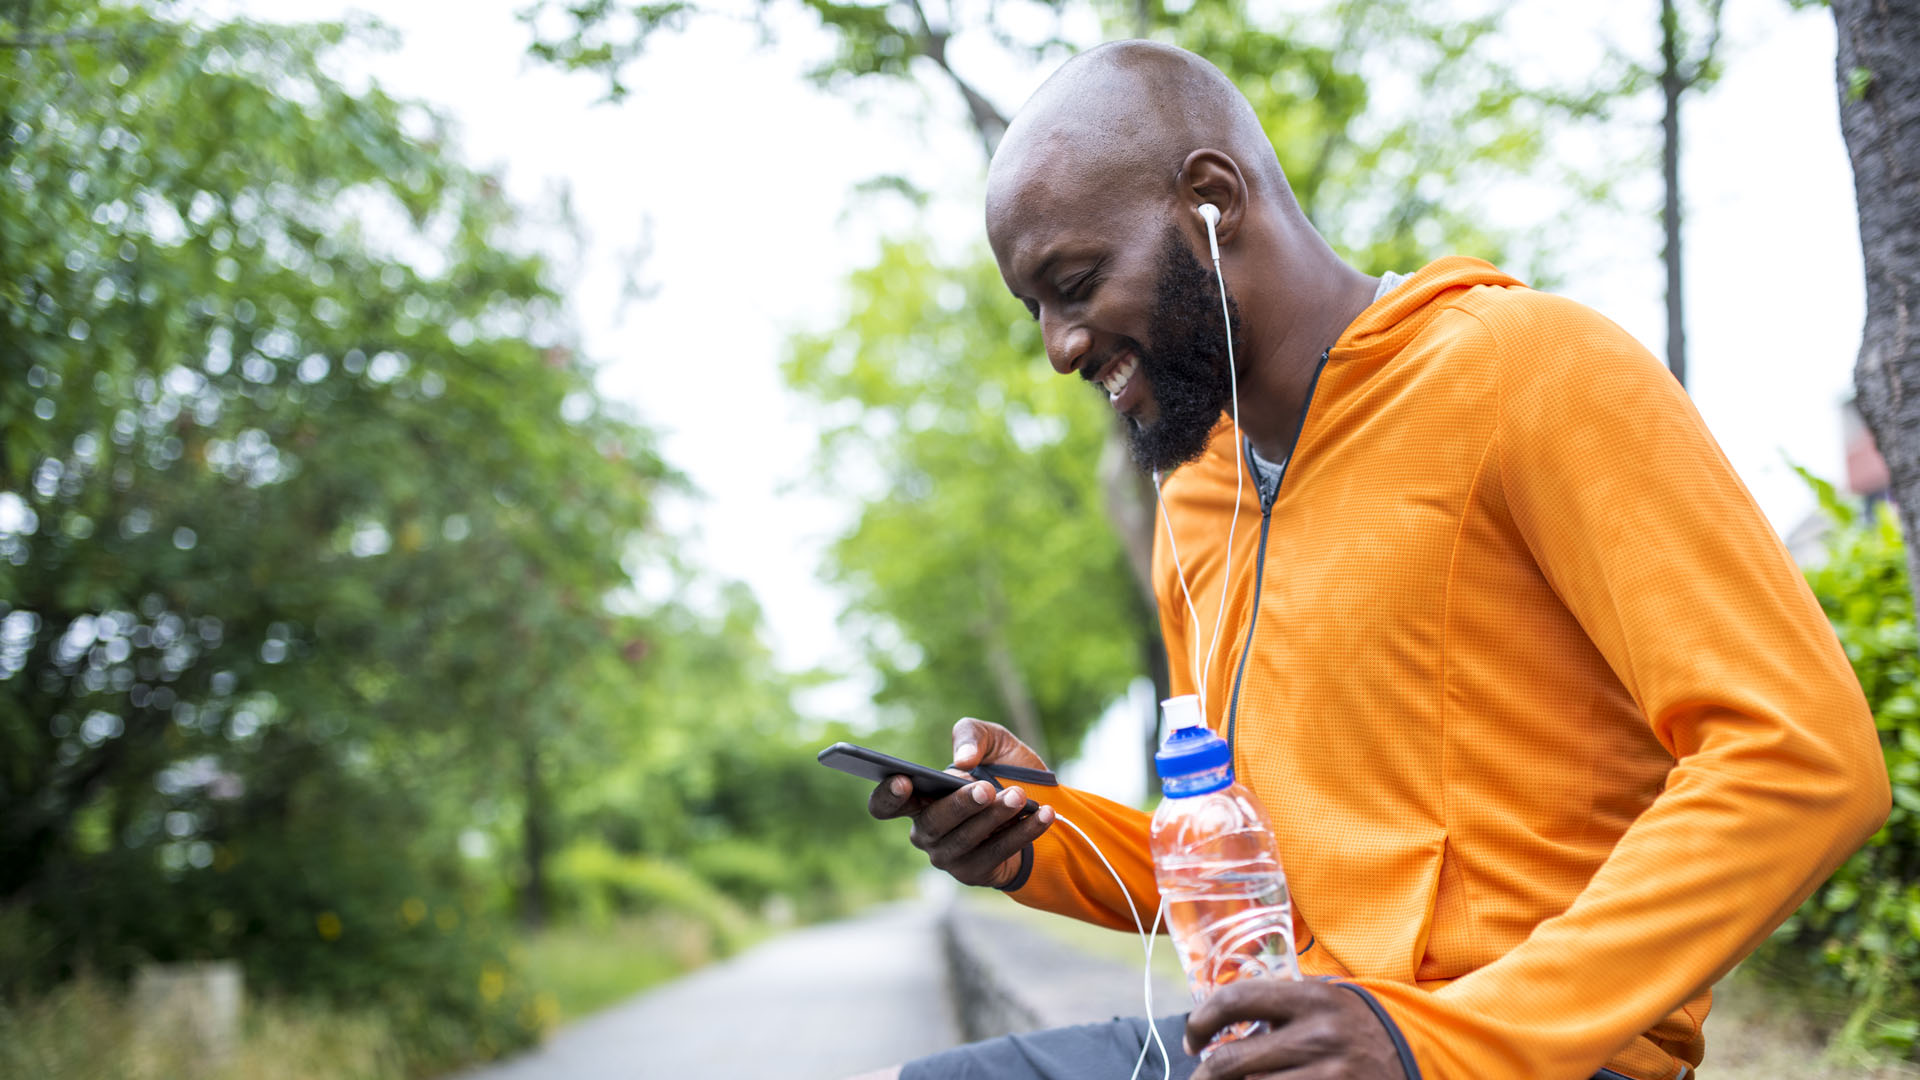 African american man sitting outdoors before his training. He is holding mobile phone in one hand and bottle of water in other hand. He is looking at telephone and smiling.